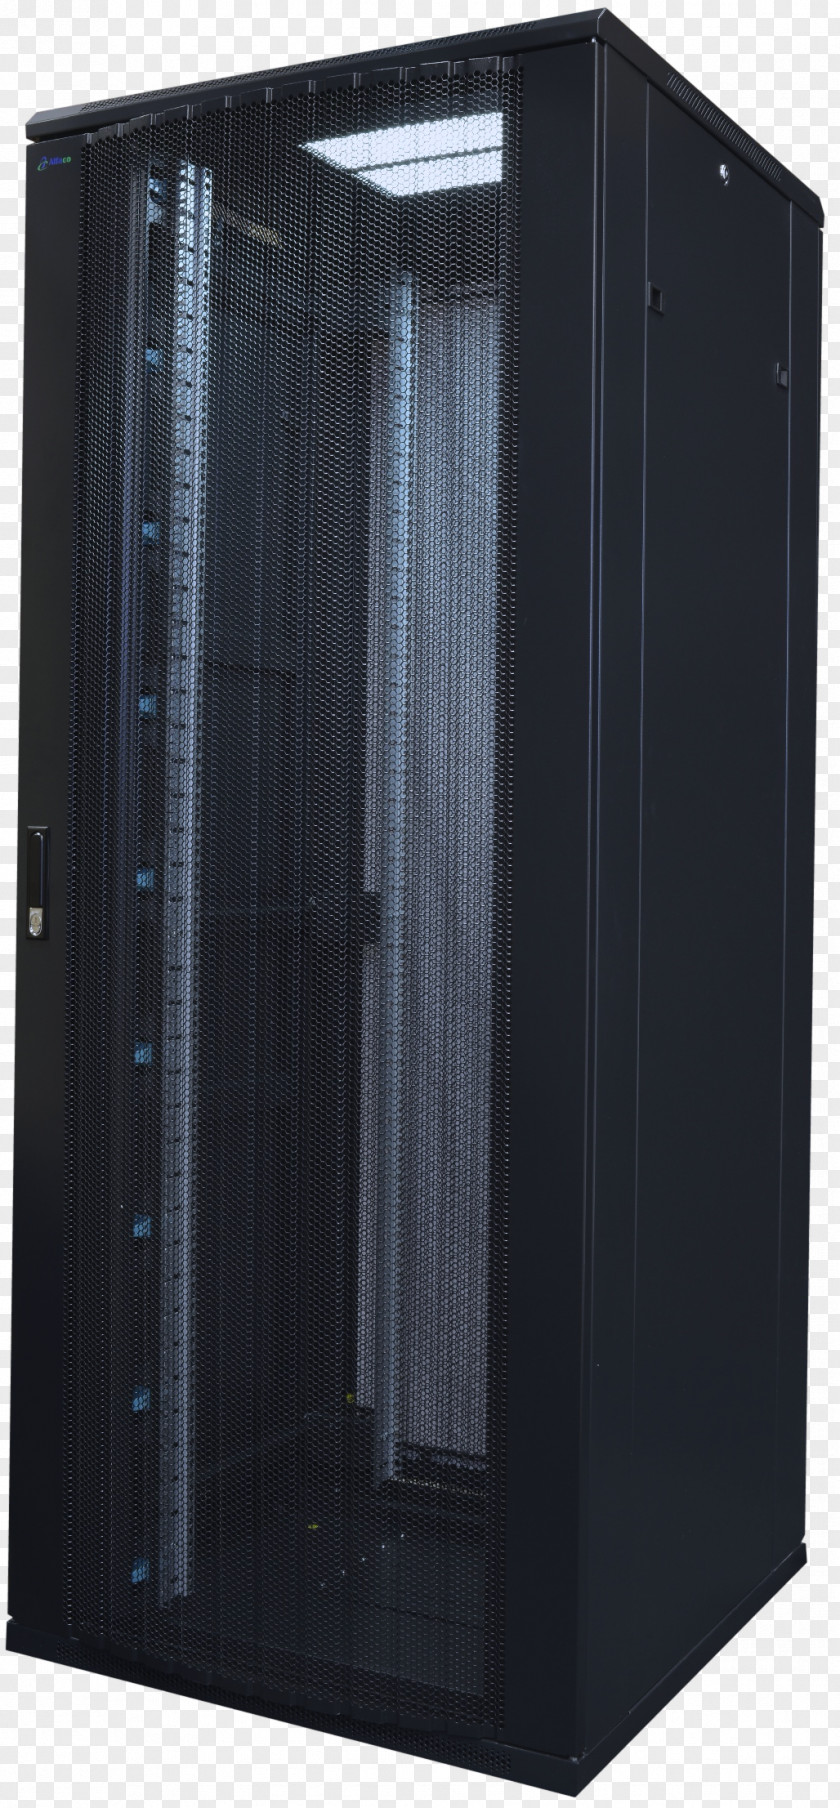 19-inch Rack Computer Servers Cases & Housings PNG